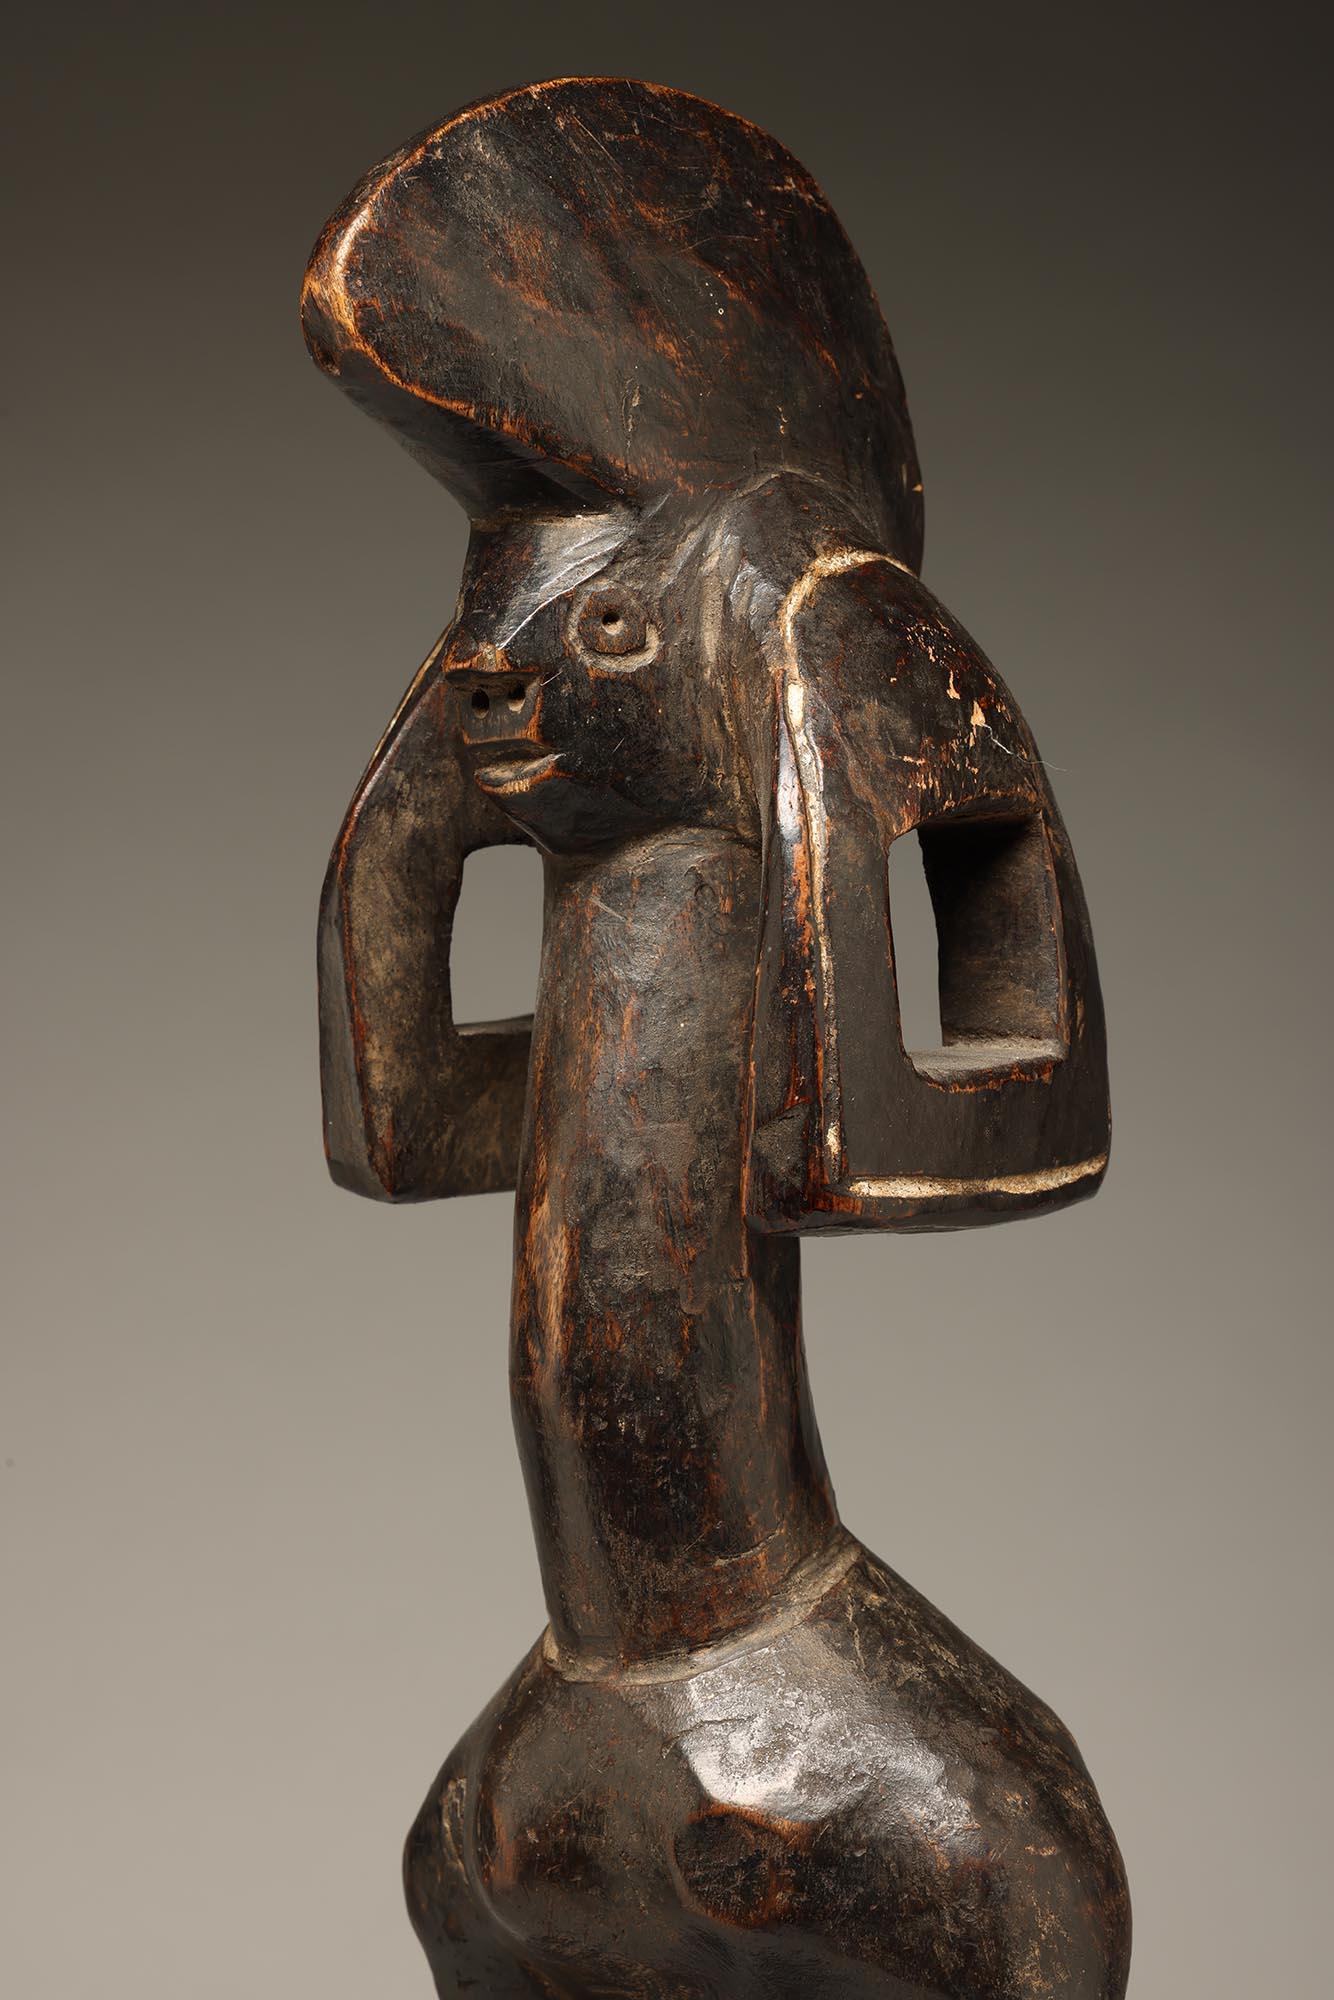 Early standing Mumuye stylized figure with crested hair and open work details.  Classic rounded cubist forms that the Mumuye sculptors are known for. Northern Nigeria, West Africa.
ex- CA collection, acquired in 2005 from Joris Visser,